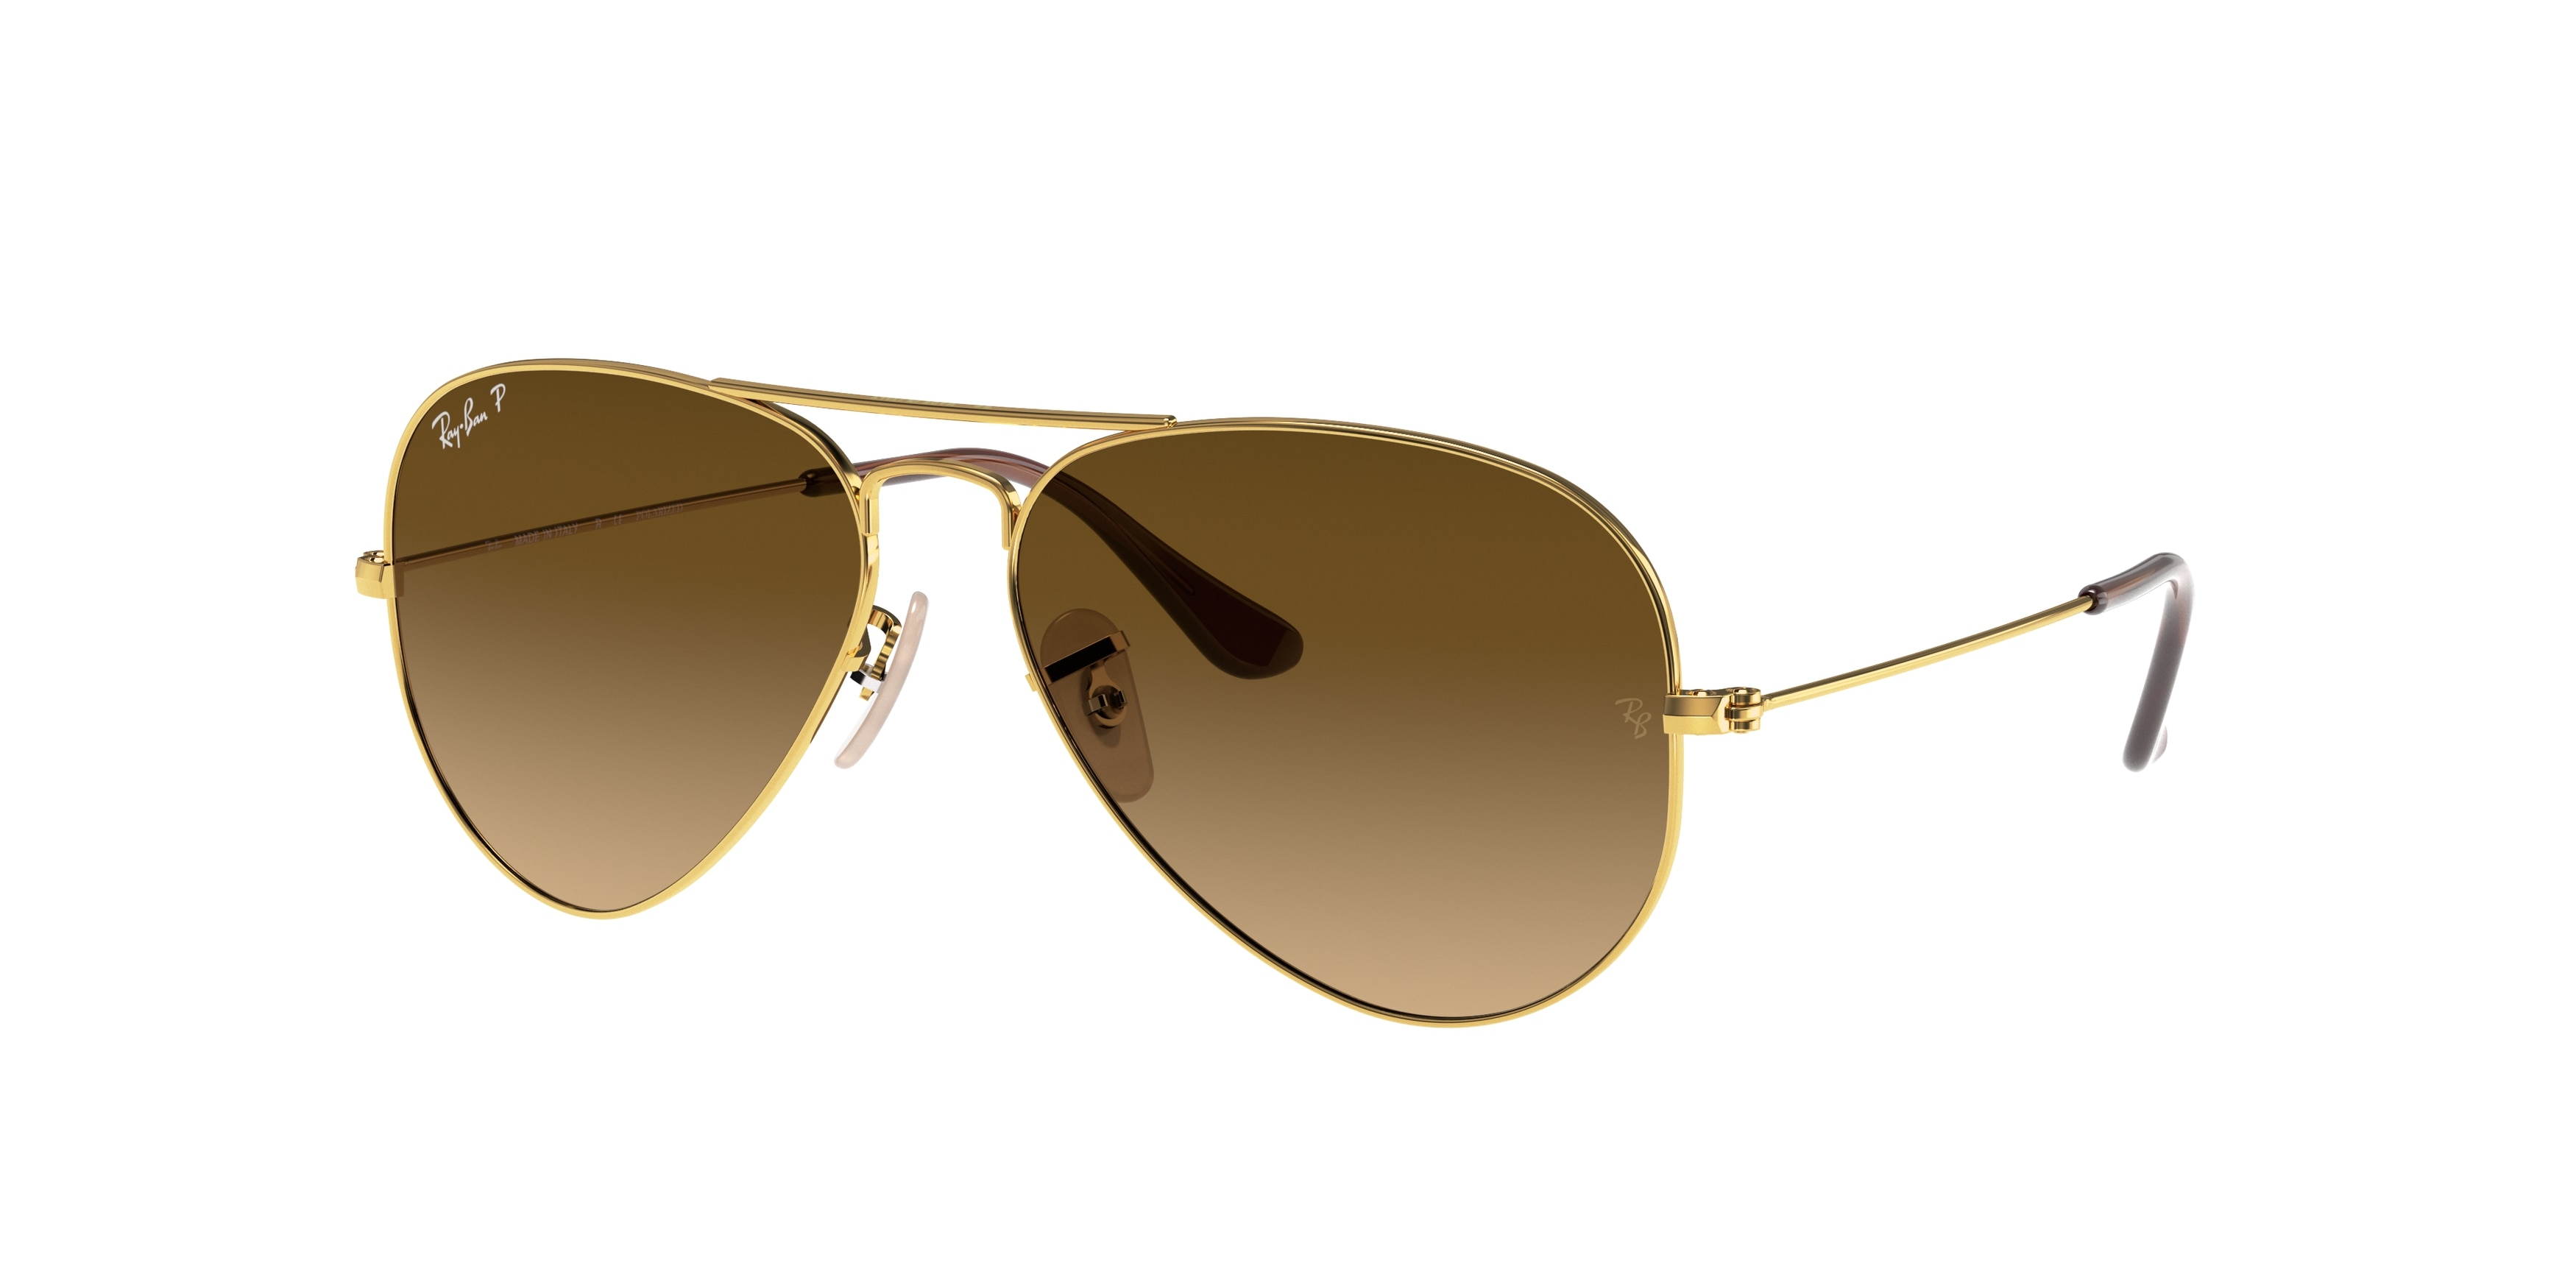 Ray-ban Aviator Large Metal RB3025 001/M2 Gold Polarized (Polarized Brown Gradient)